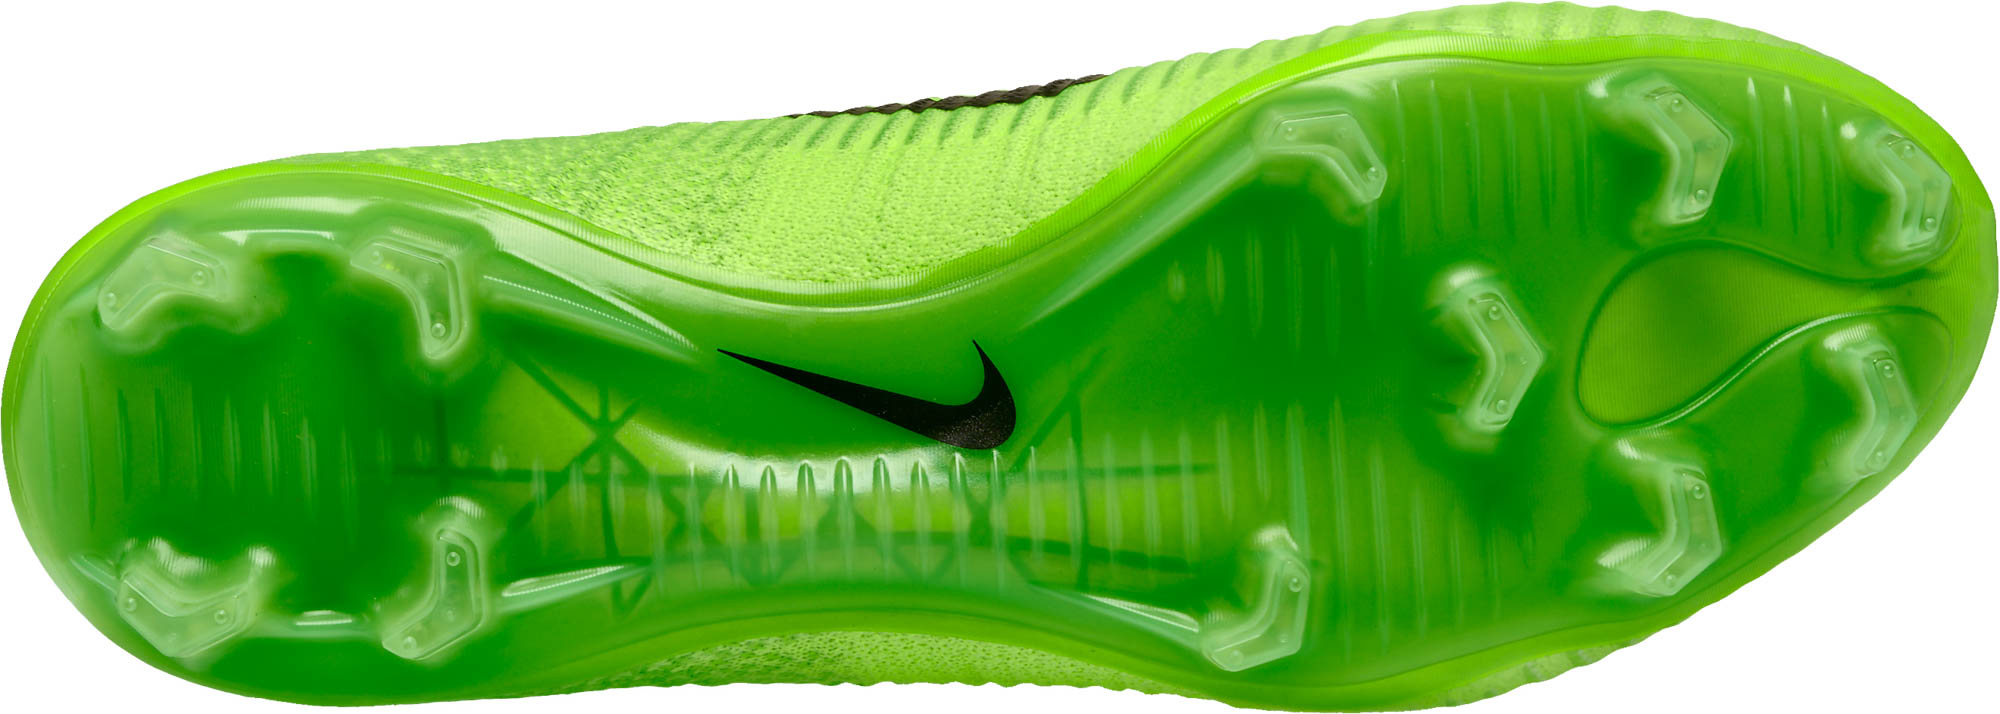 Nike Mercurial Superfly FG - Green Cleats